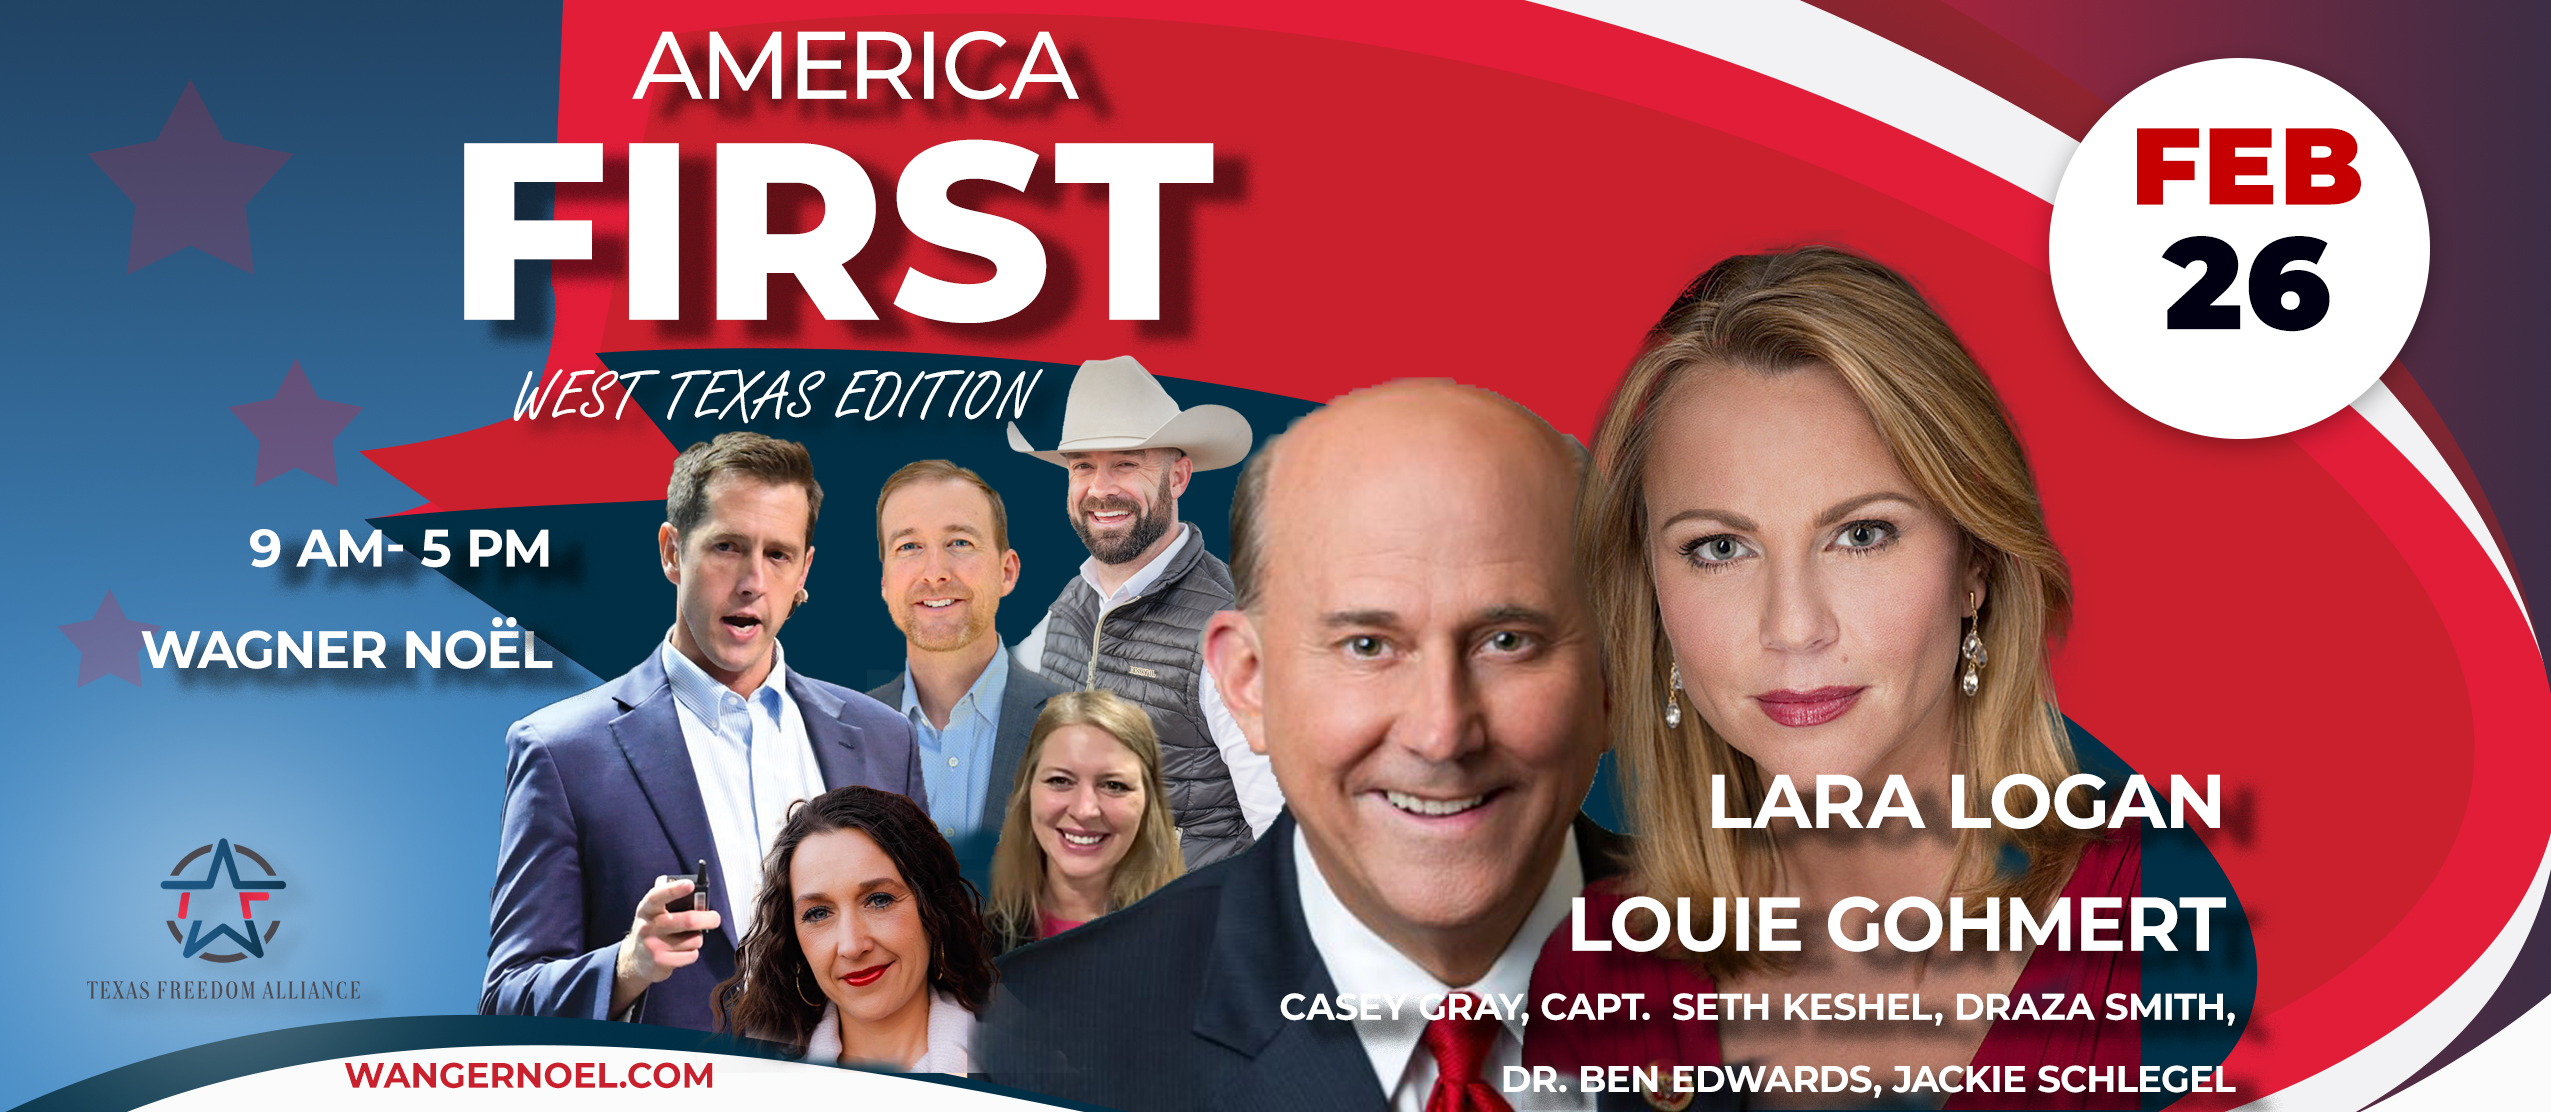 The America First: West Texas Edition Conference